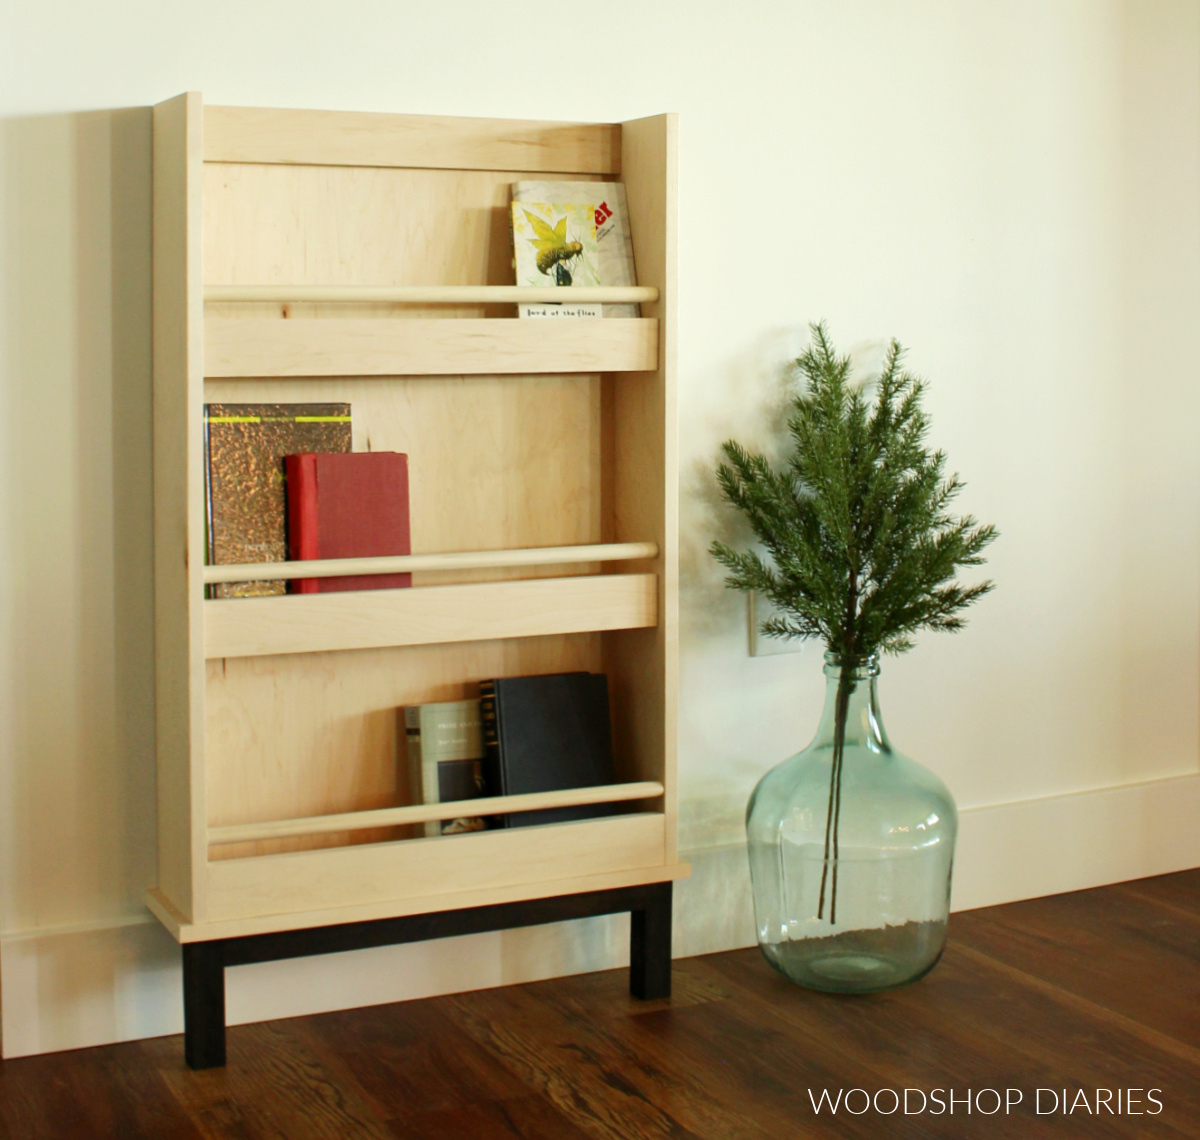 Plywood book shelf rack with various books inside leaning against wall next to glass vase